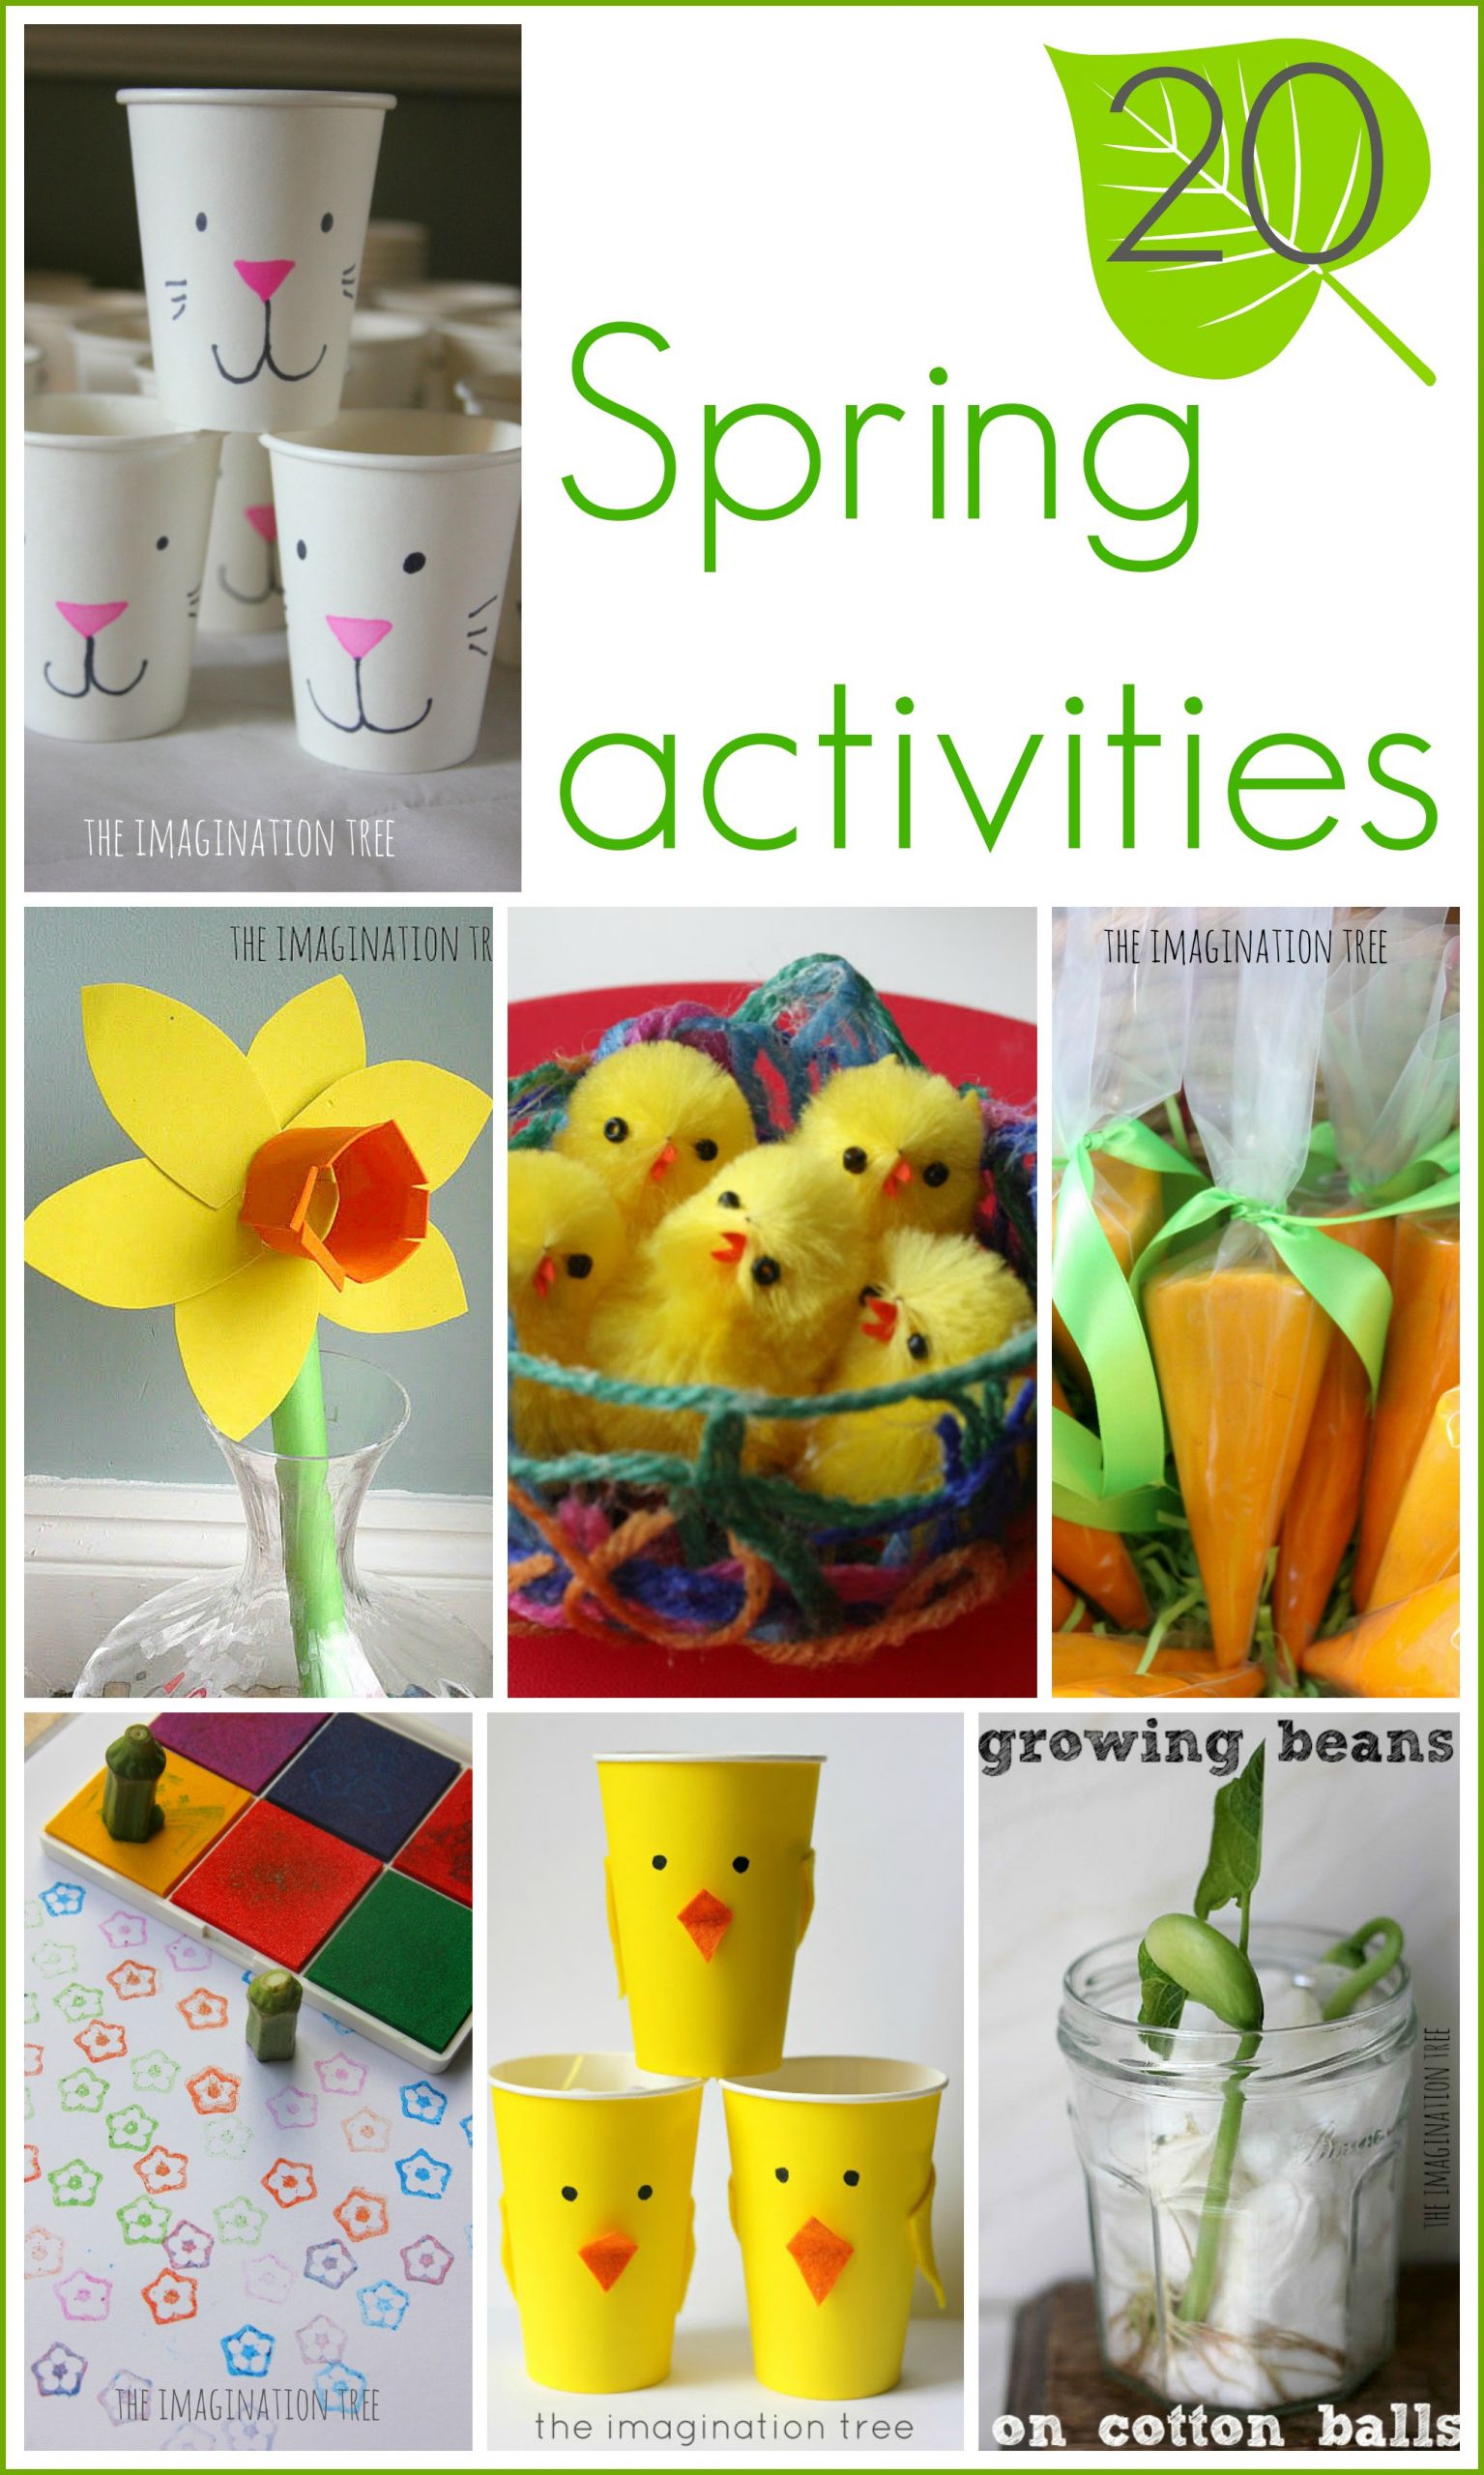 Springtime Crafts For Toddlers
 15 Spring Activities for Kids The Imagination Tree